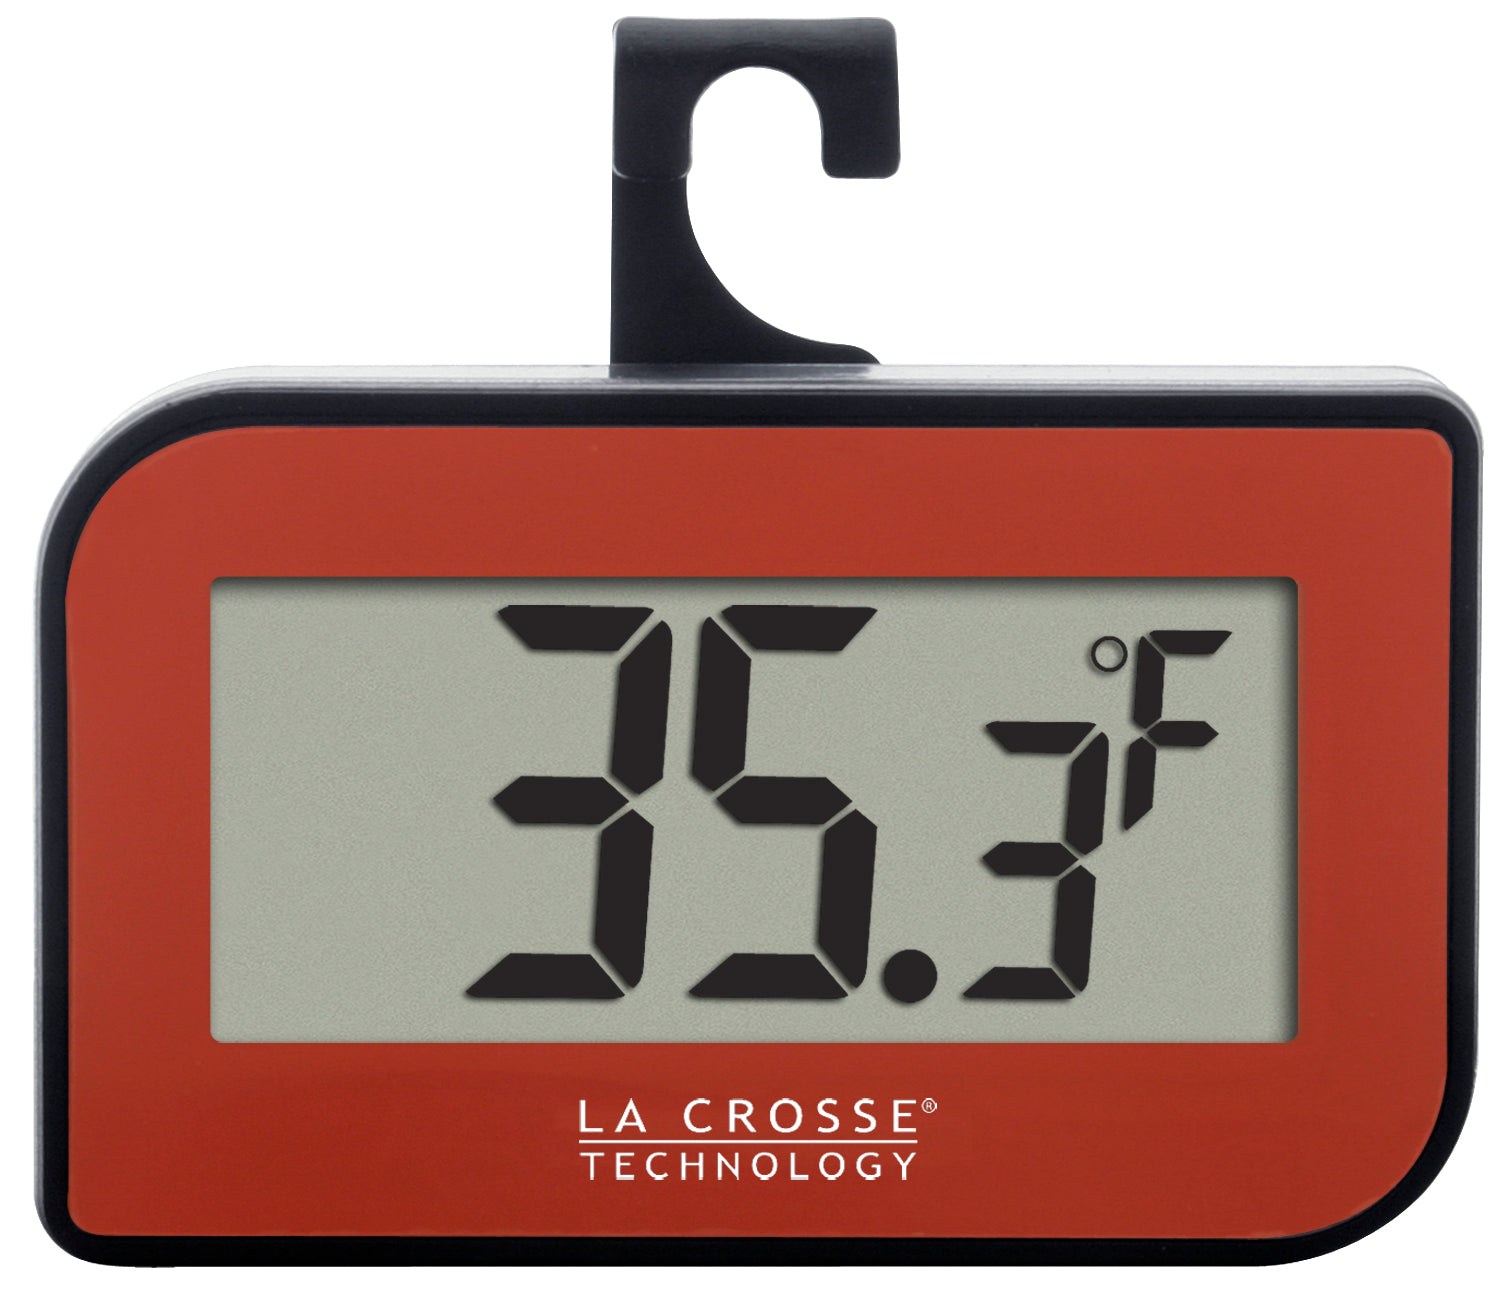 20 - 120 Degree C 5 Face 15 Stem Teltru BC550R Series 40101586 Thermometer, Thermometers & Temperature Gauges, Gauges, Water Pumps